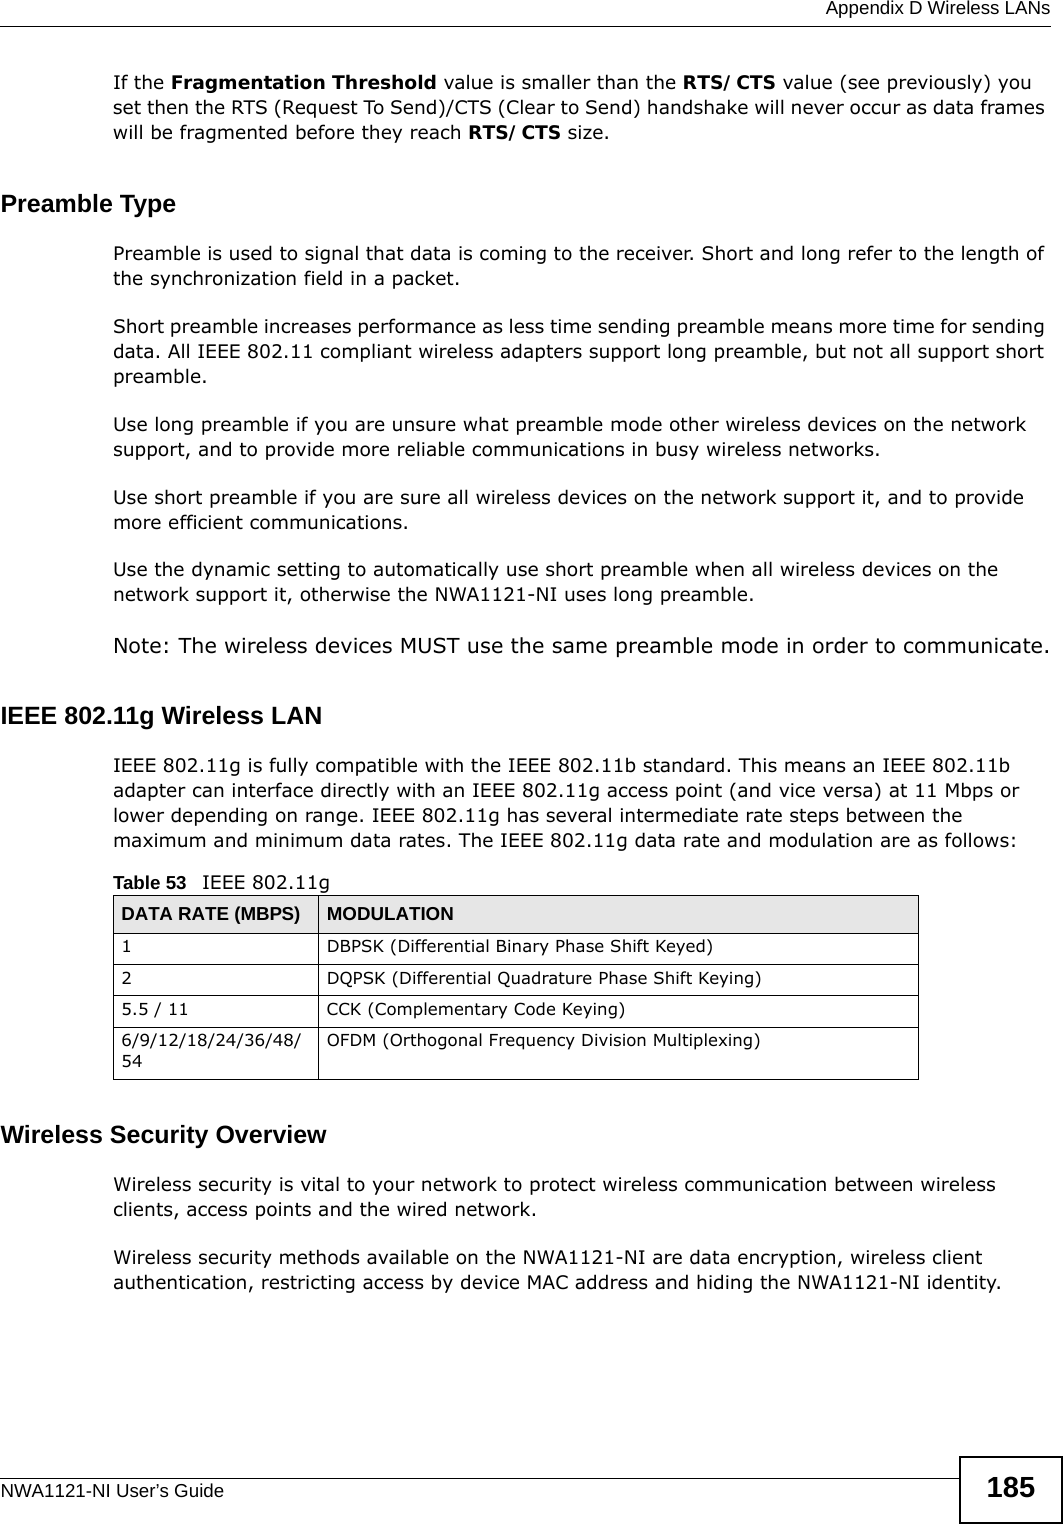  Appendix D Wireless LANsNWA1121-NI User’s Guide 185If the Fragmentation Threshold value is smaller than the RTS/CTS value (see previously) you set then the RTS (Request To Send)/CTS (Clear to Send) handshake will never occur as data frames will be fragmented before they reach RTS/CTS size.Preamble TypePreamble is used to signal that data is coming to the receiver. Short and long refer to the length of the synchronization field in a packet.Short preamble increases performance as less time sending preamble means more time for sending data. All IEEE 802.11 compliant wireless adapters support long preamble, but not all support short preamble. Use long preamble if you are unsure what preamble mode other wireless devices on the network support, and to provide more reliable communications in busy wireless networks. Use short preamble if you are sure all wireless devices on the network support it, and to provide more efficient communications.Use the dynamic setting to automatically use short preamble when all wireless devices on the network support it, otherwise the NWA1121-NI uses long preamble.Note: The wireless devices MUST use the same preamble mode in order to communicate.IEEE 802.11g Wireless LANIEEE 802.11g is fully compatible with the IEEE 802.11b standard. This means an IEEE 802.11b adapter can interface directly with an IEEE 802.11g access point (and vice versa) at 11 Mbps or lower depending on range. IEEE 802.11g has several intermediate rate steps between the maximum and minimum data rates. The IEEE 802.11g data rate and modulation are as follows:Wireless Security OverviewWireless security is vital to your network to protect wireless communication between wireless clients, access points and the wired network.Wireless security methods available on the NWA1121-NI are data encryption, wireless client authentication, restricting access by device MAC address and hiding the NWA1121-NI identity.Table 53   IEEE 802.11gDATA RATE (MBPS) MODULATION1 DBPSK (Differential Binary Phase Shift Keyed)2 DQPSK (Differential Quadrature Phase Shift Keying)5.5 / 11 CCK (Complementary Code Keying) 6/9/12/18/24/36/48/54OFDM (Orthogonal Frequency Division Multiplexing) 